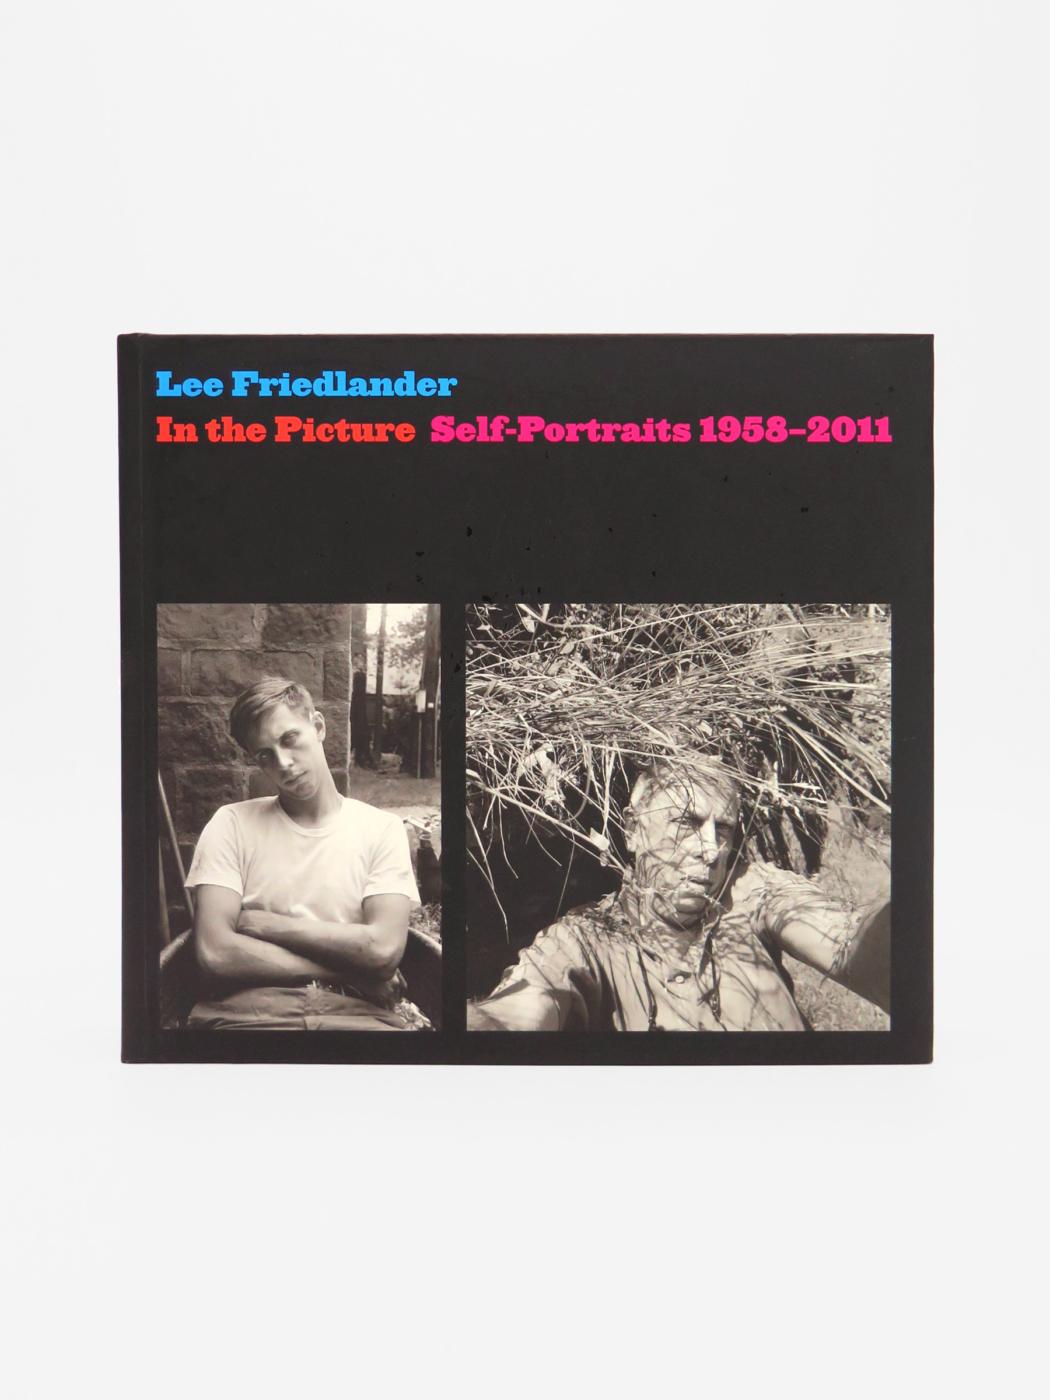 Lee Friedlander, In the Picture: Self-Portraits 1958-2011